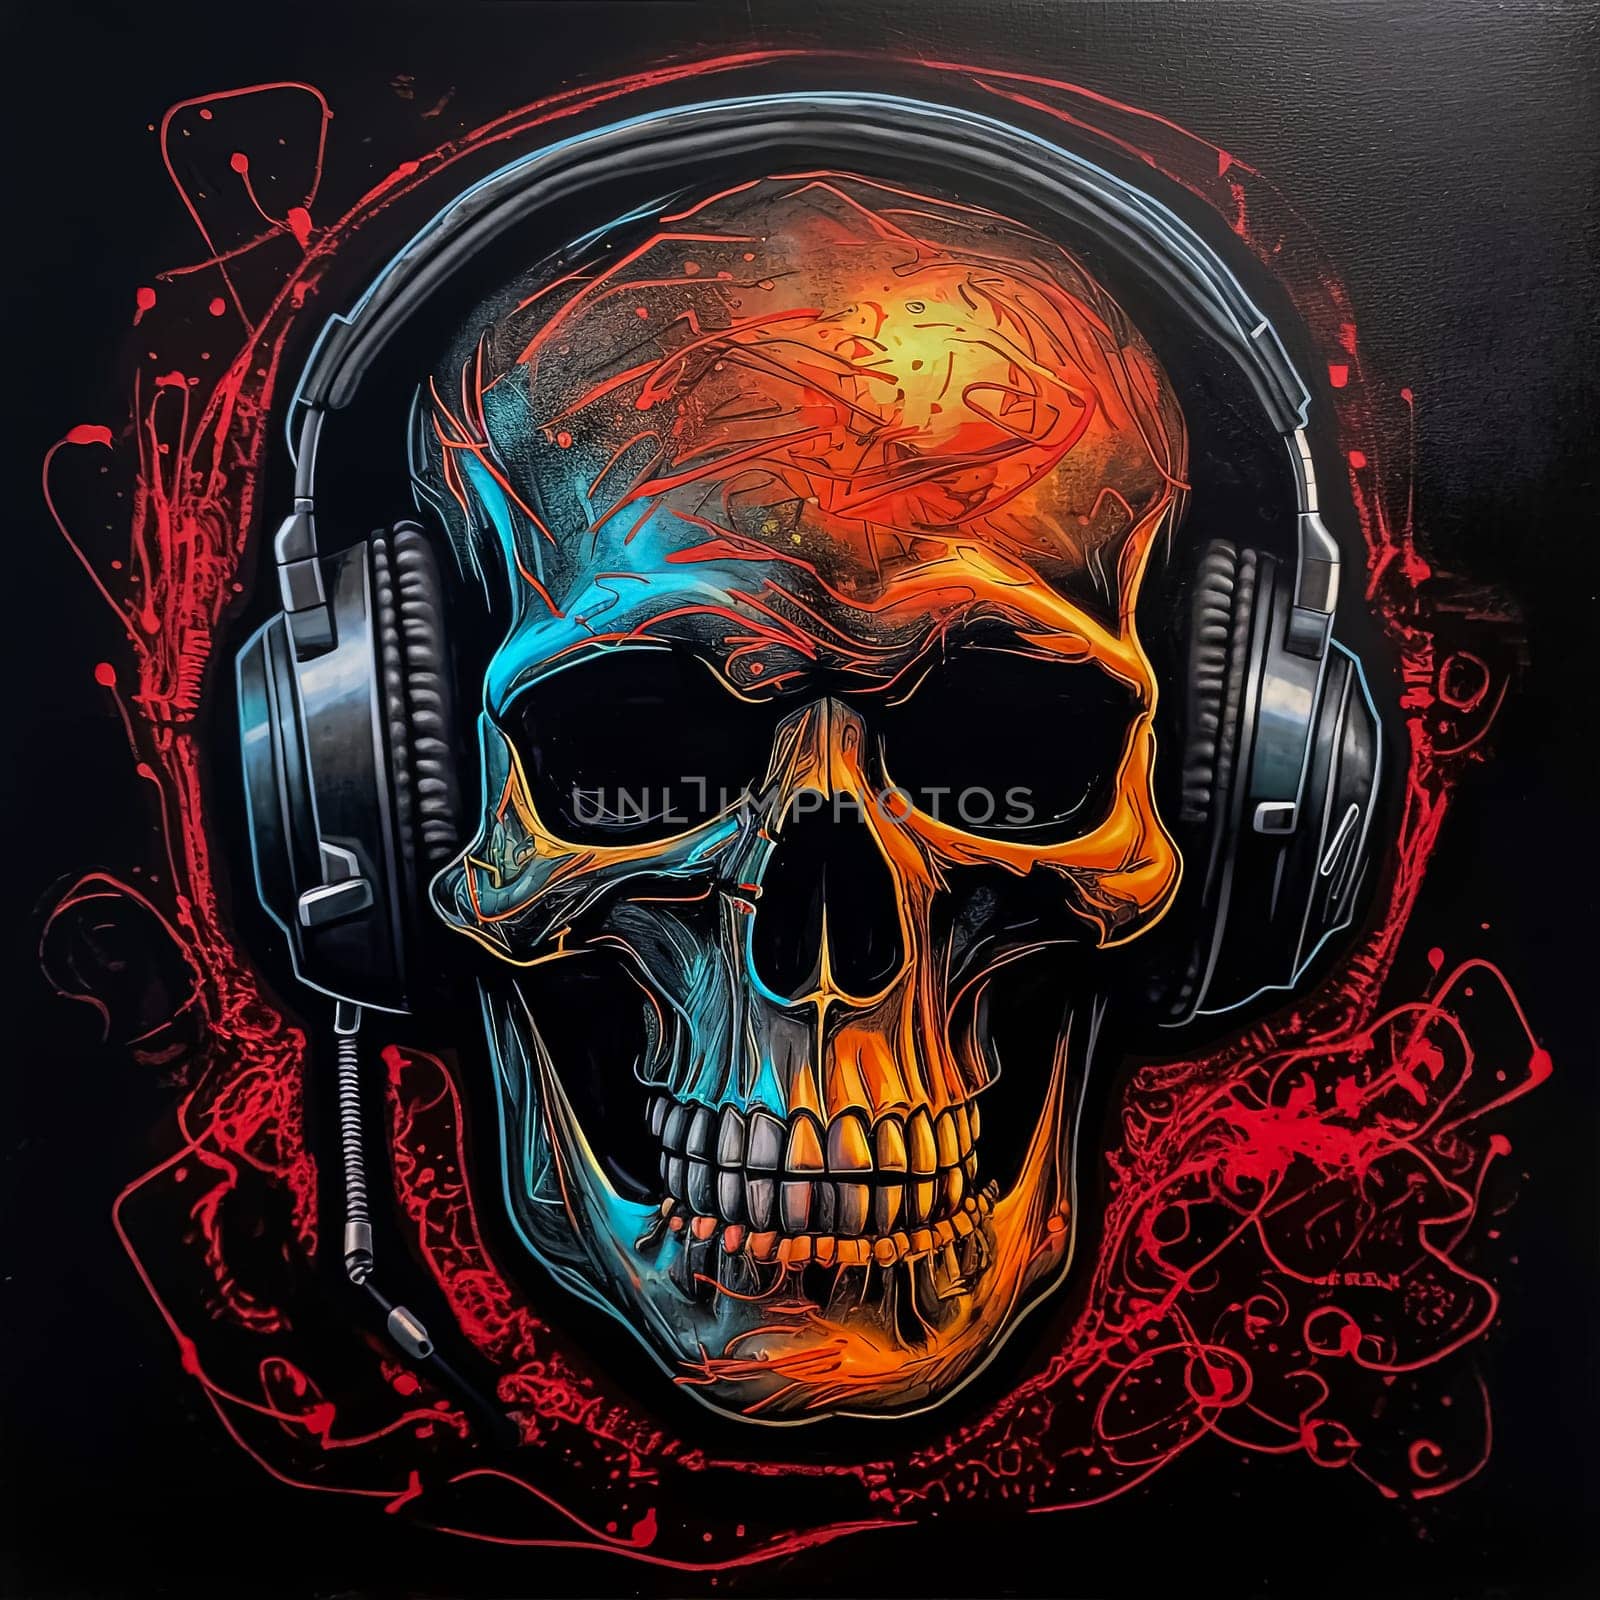 A neon skull with neon colors. The skull is surrounded by a colorful background. The colors are bright and vibrant, giving the image a fun and energetic vibe